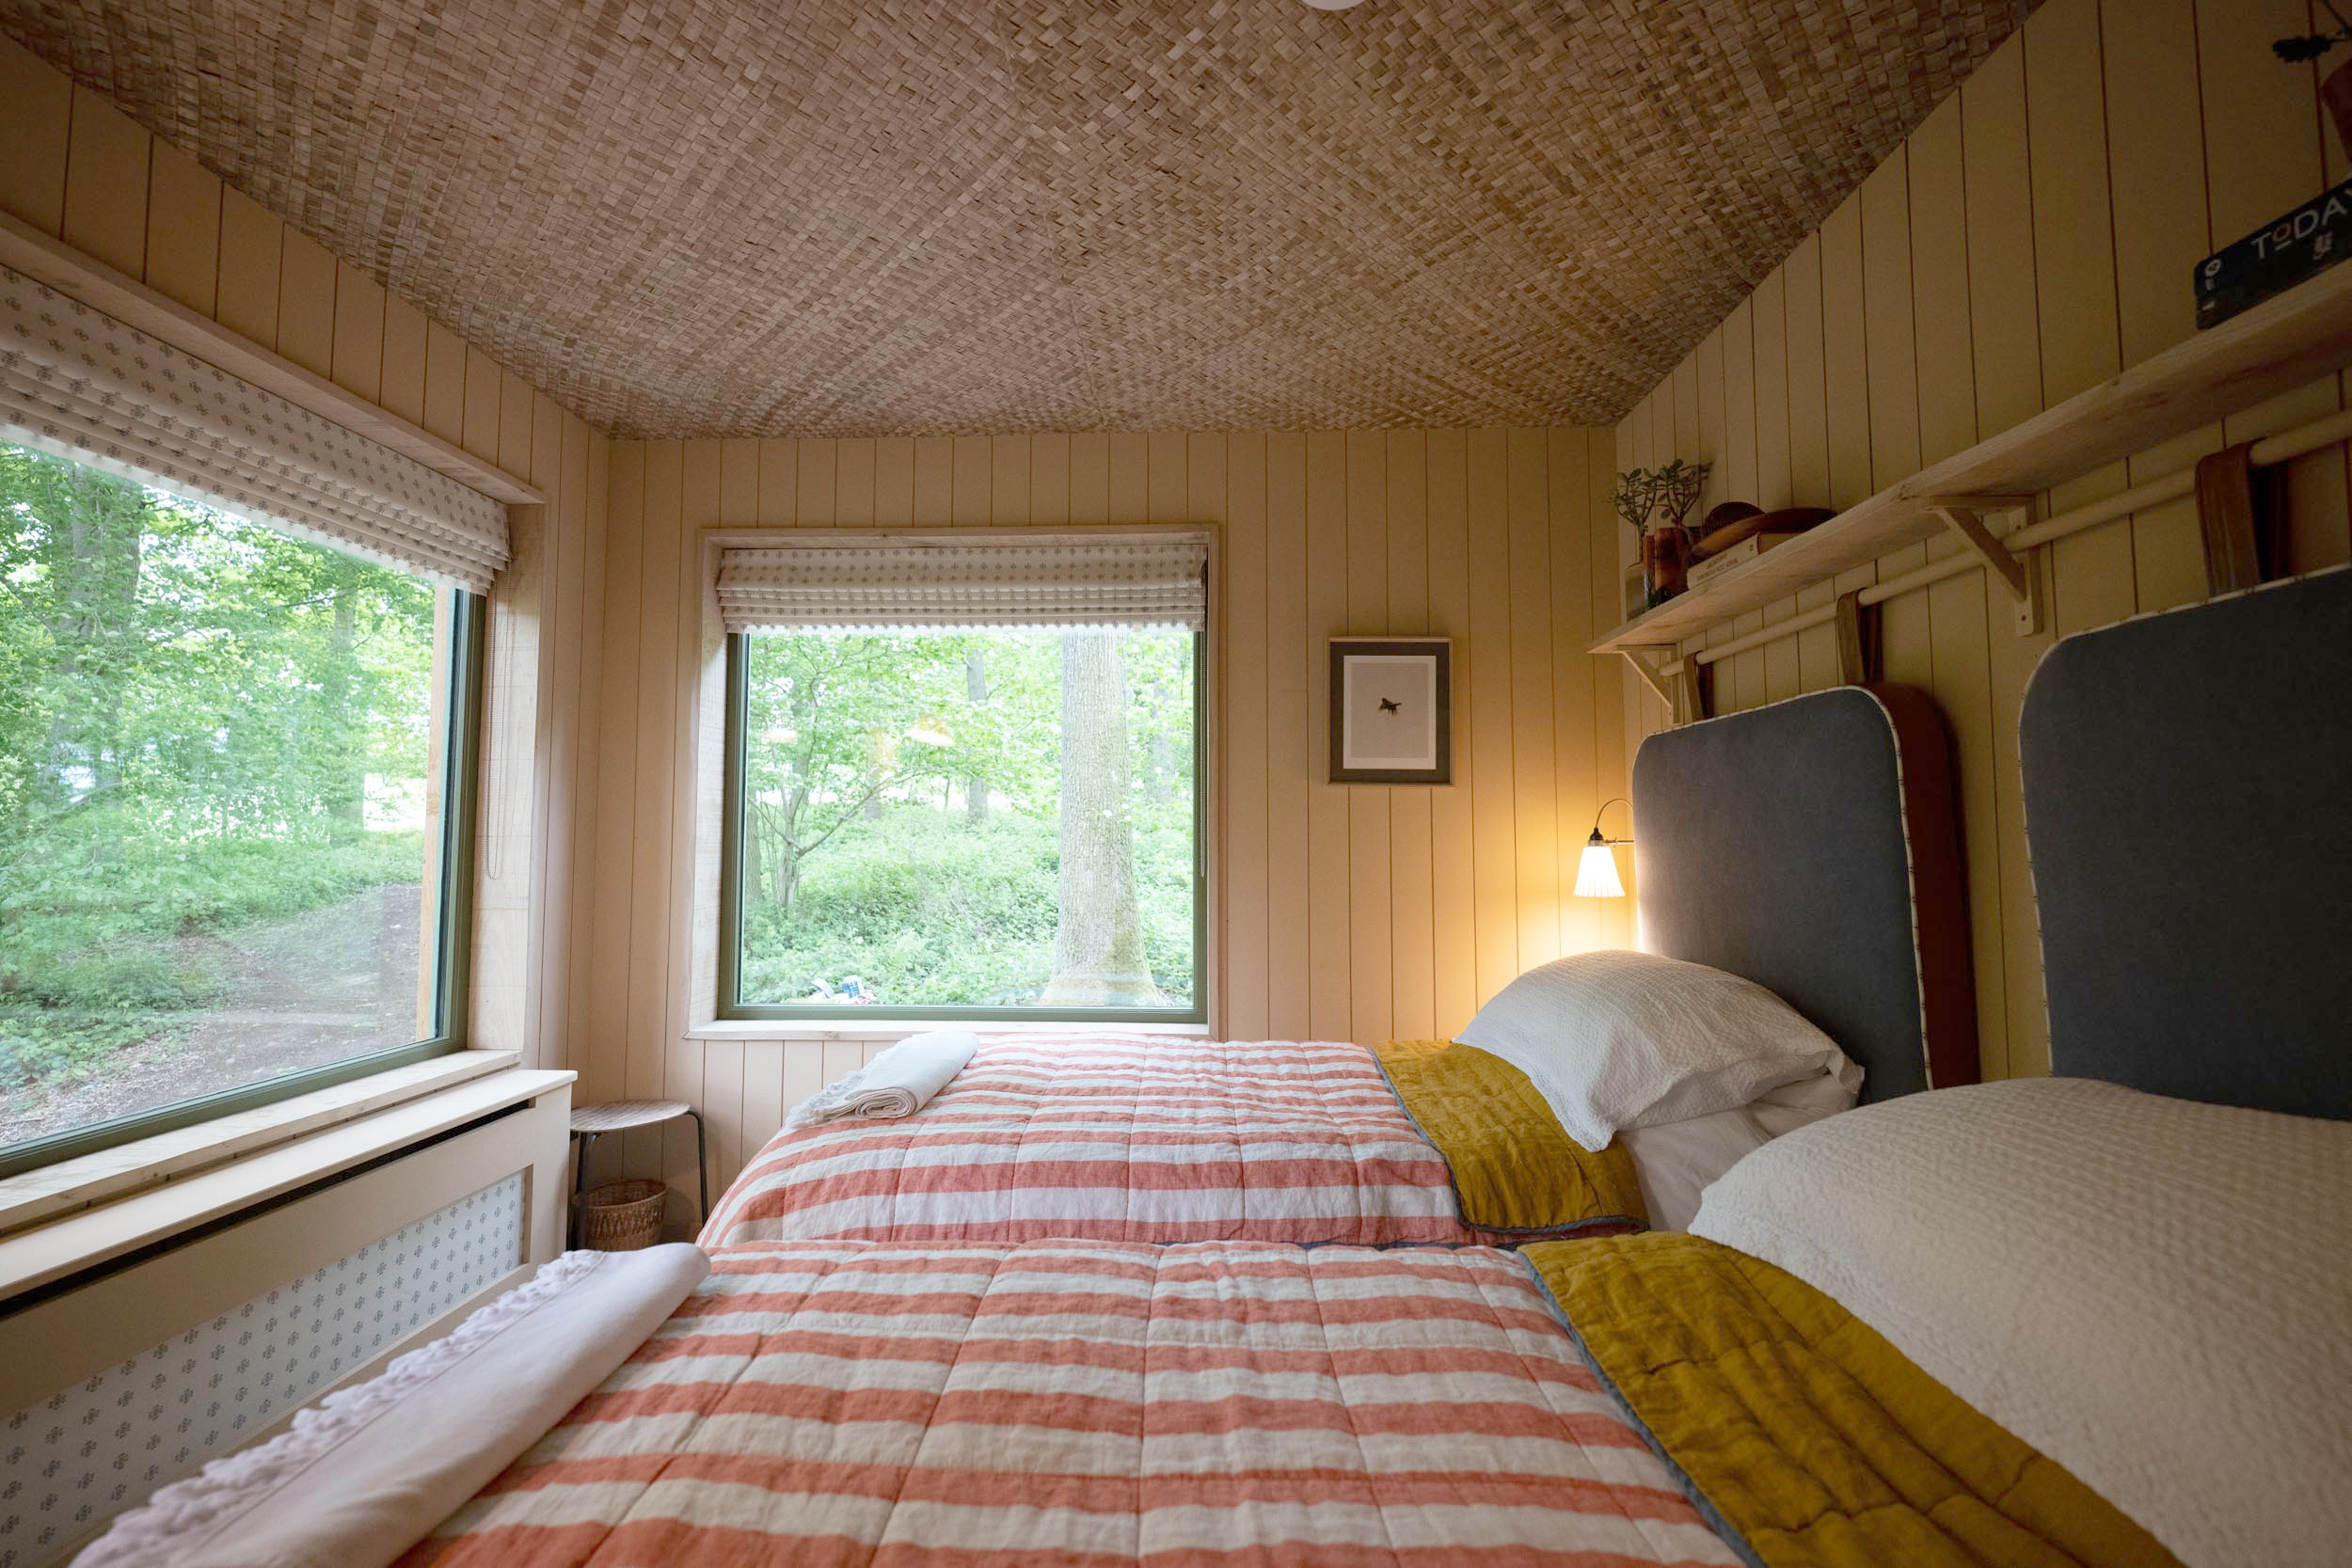 Small bedroom, The Quist, a tree cabin rental in Herefordshire, England. Luke Atkinson photo.